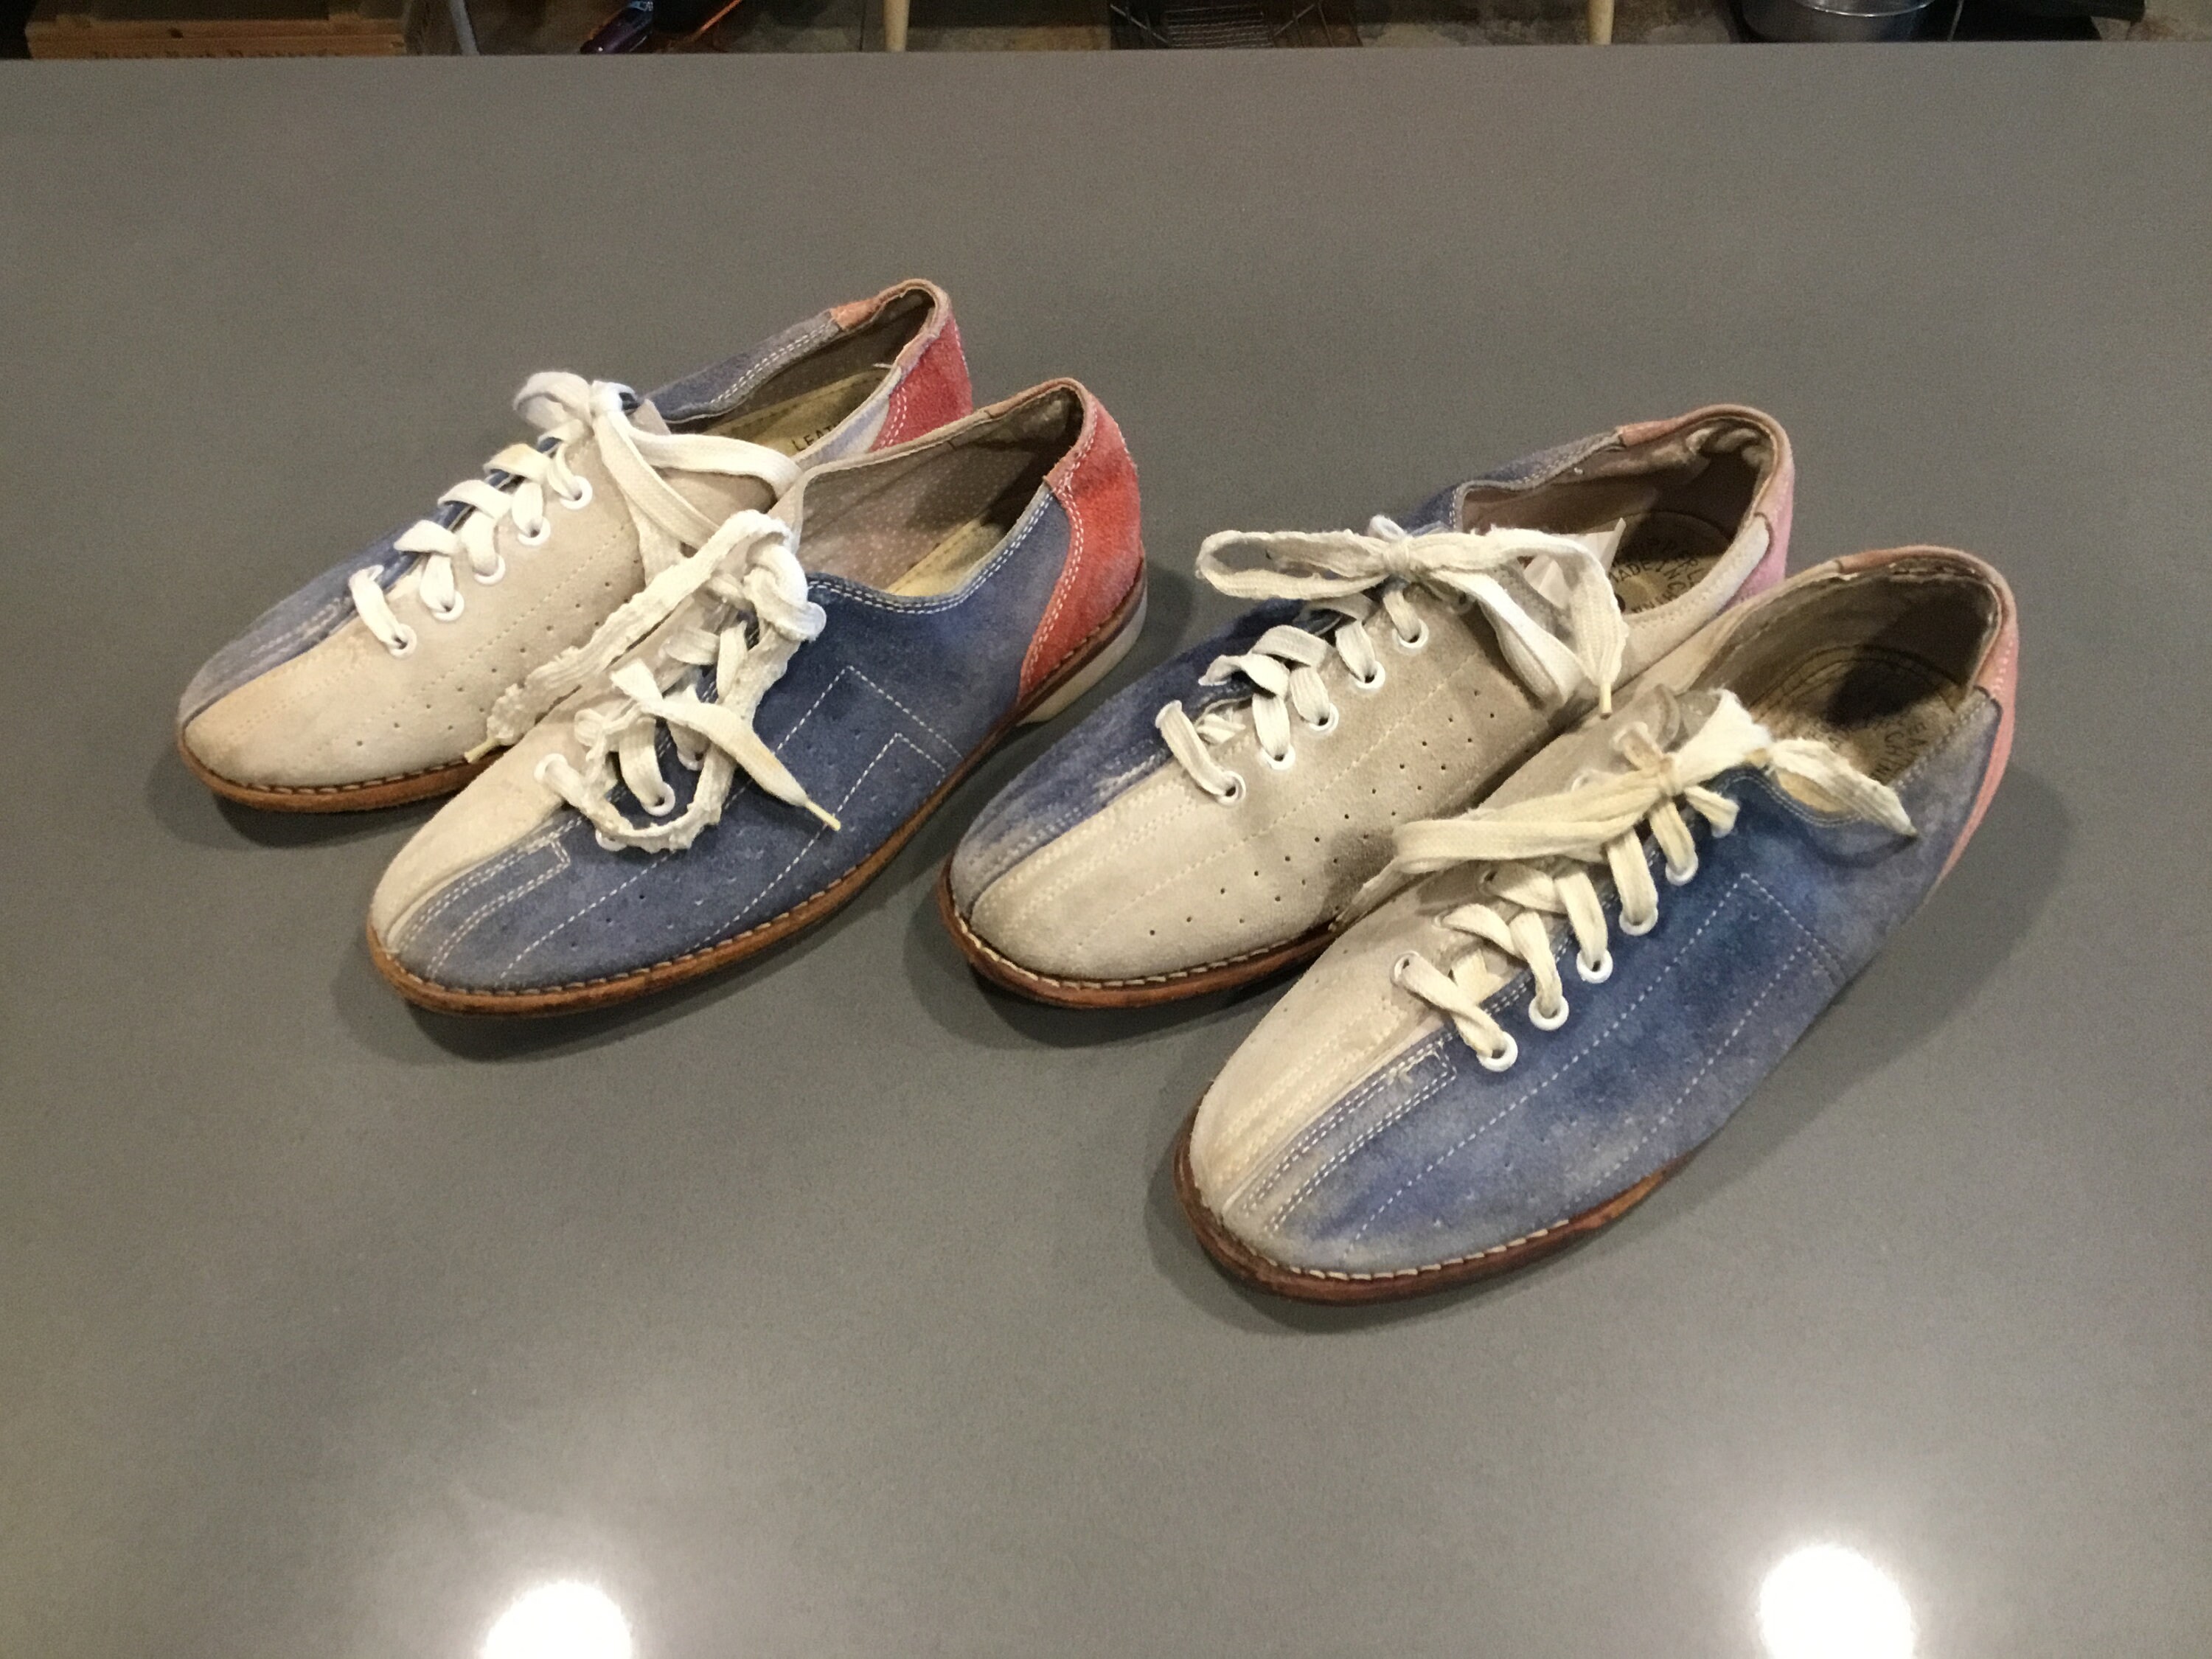 Jordan Bowling Shoes for sale | Only 3 left at -70%